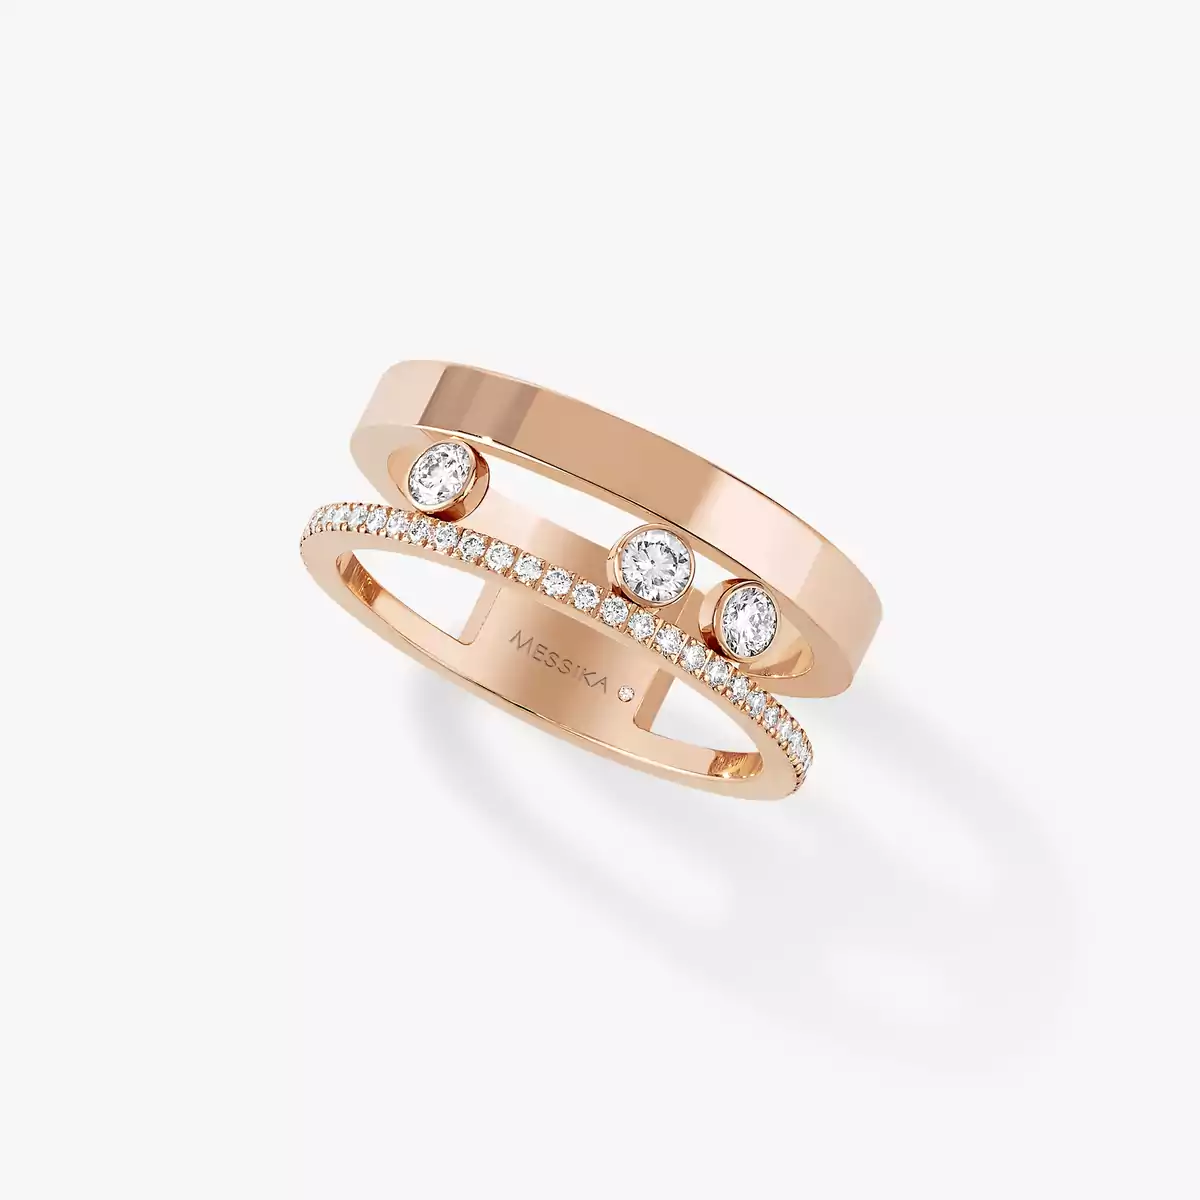 Move Romane  Pink Gold For Her Diamond Ring 06516-PG